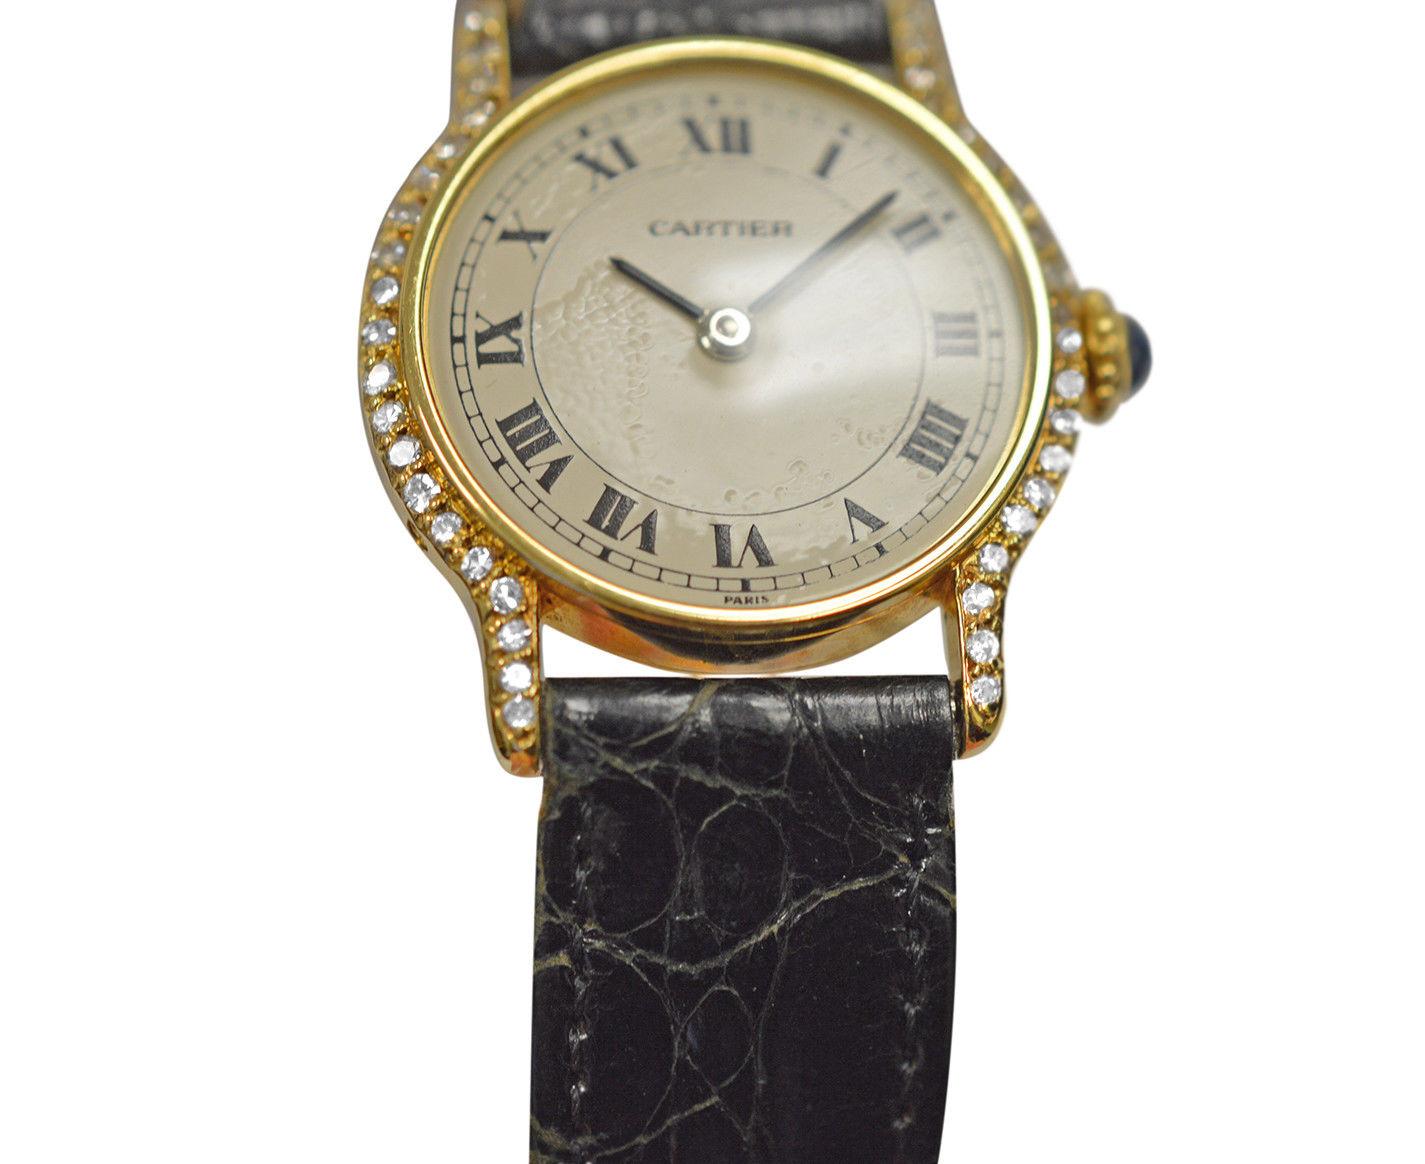 Brand	Cartier
Model	Ronde Paris W6000158
Gender	Ladies
Condition	Pre-owned
Movement	Swiss Mechanical
Case Material	18K Yellow Gold
Bracelet / Strap Material	
Aligator/Crocodile

Clasp / Buckle Material	
18K Yellow Gold	
Clasp